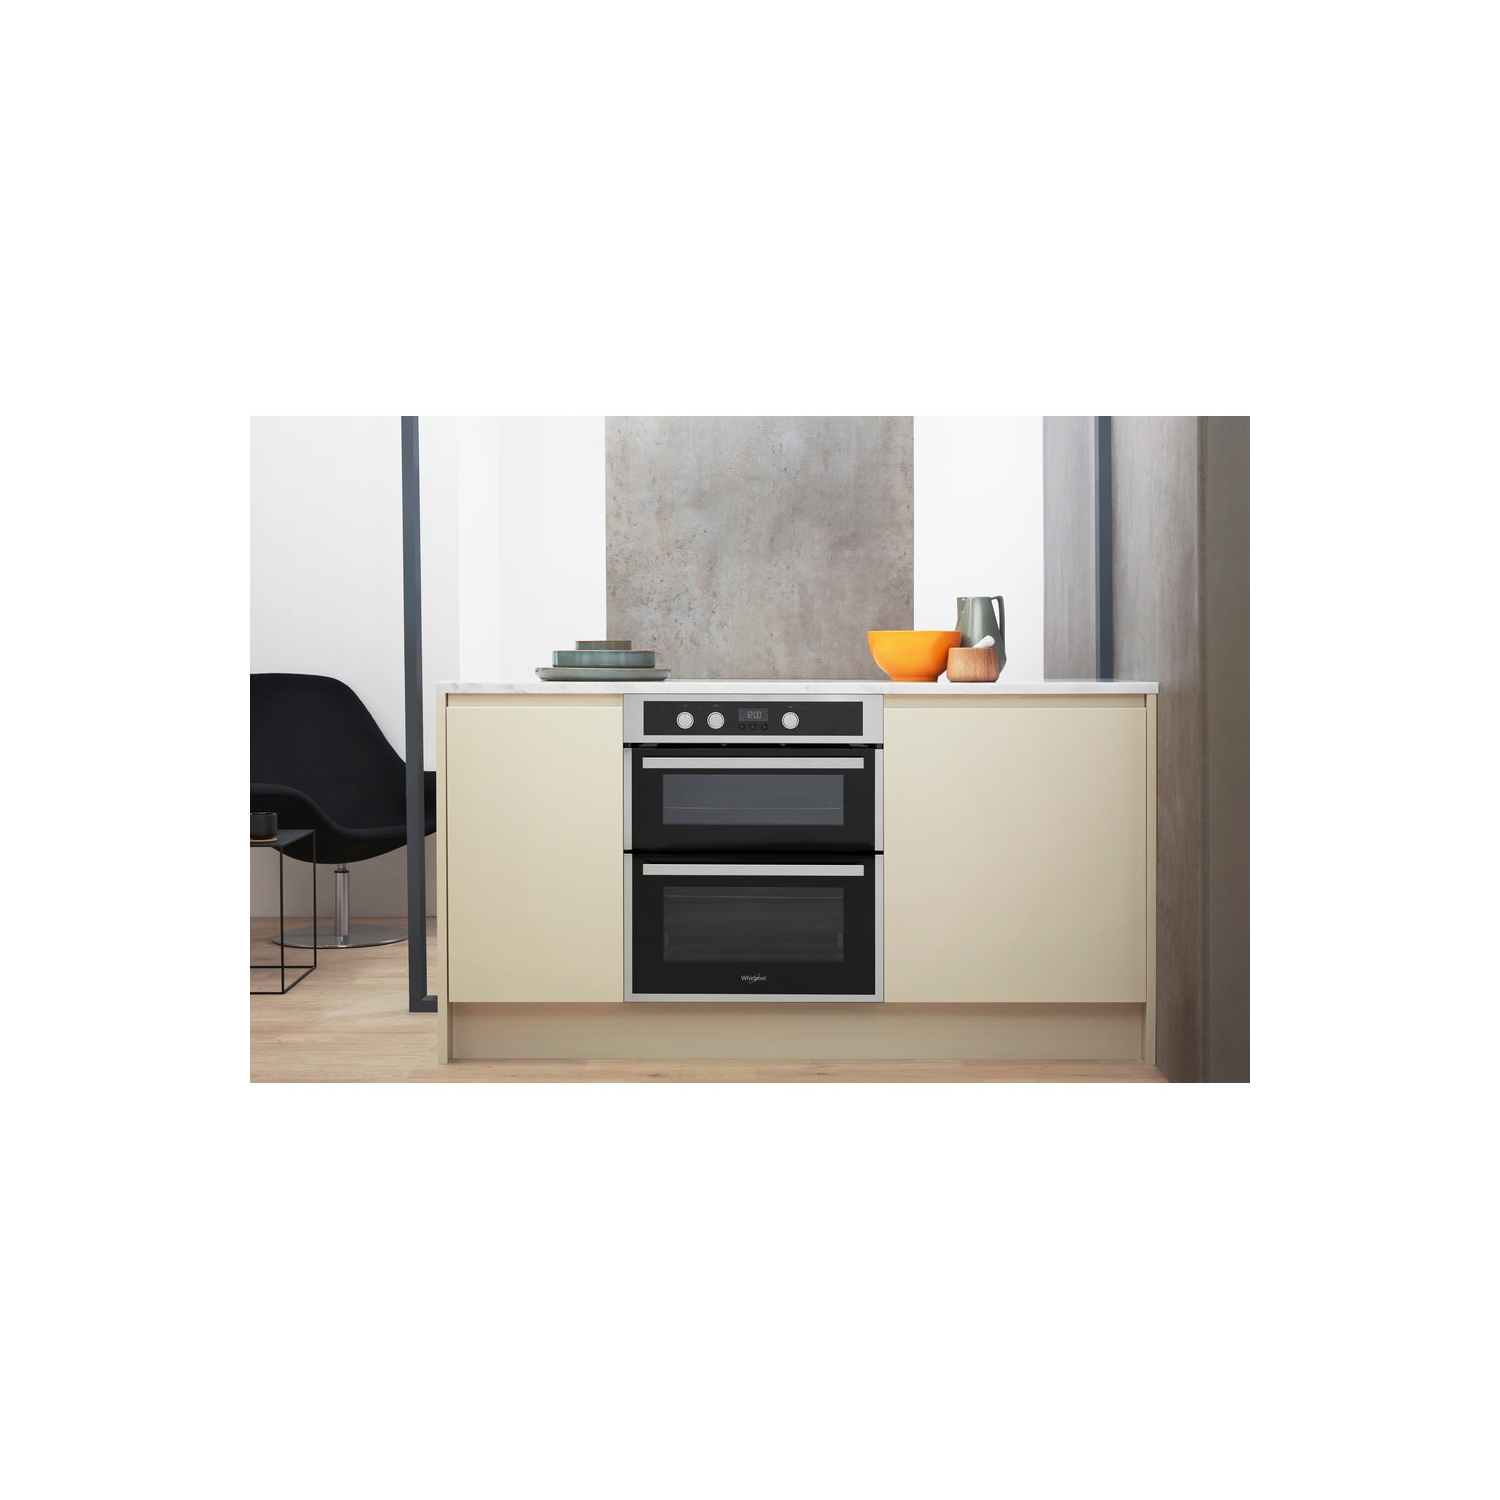 Whirlpool 60cm Built-Under Electric Oven - Stainless Steel - A Rated - 2